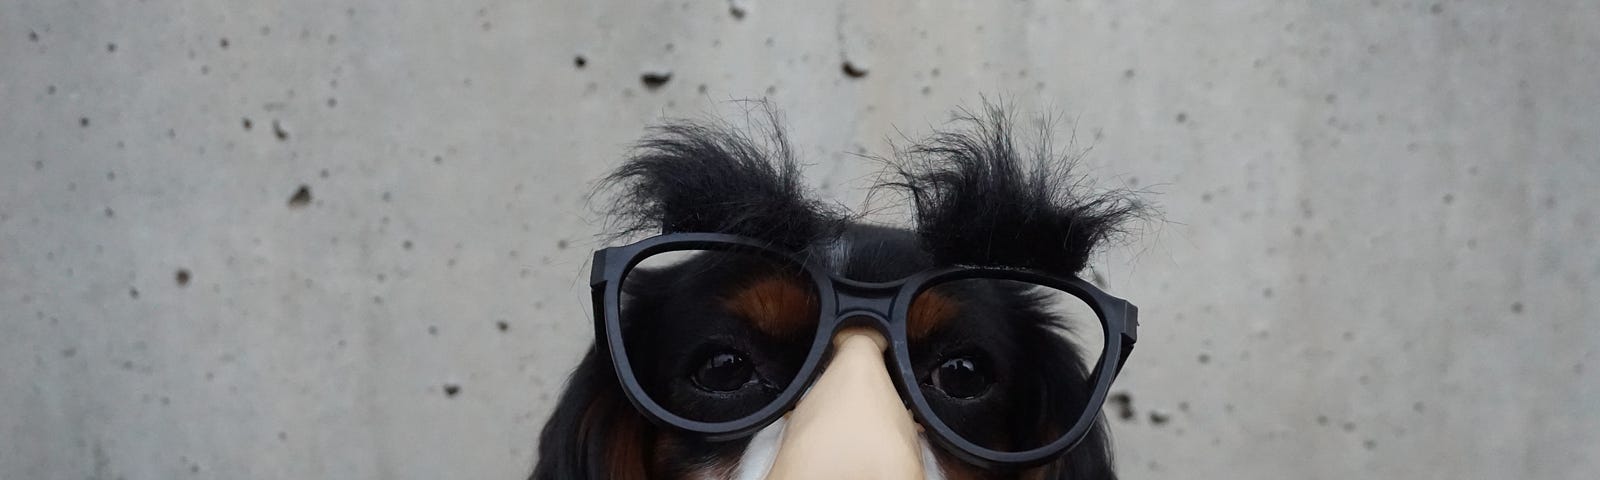 A dog wearing Groucho Marx glasses and nose.